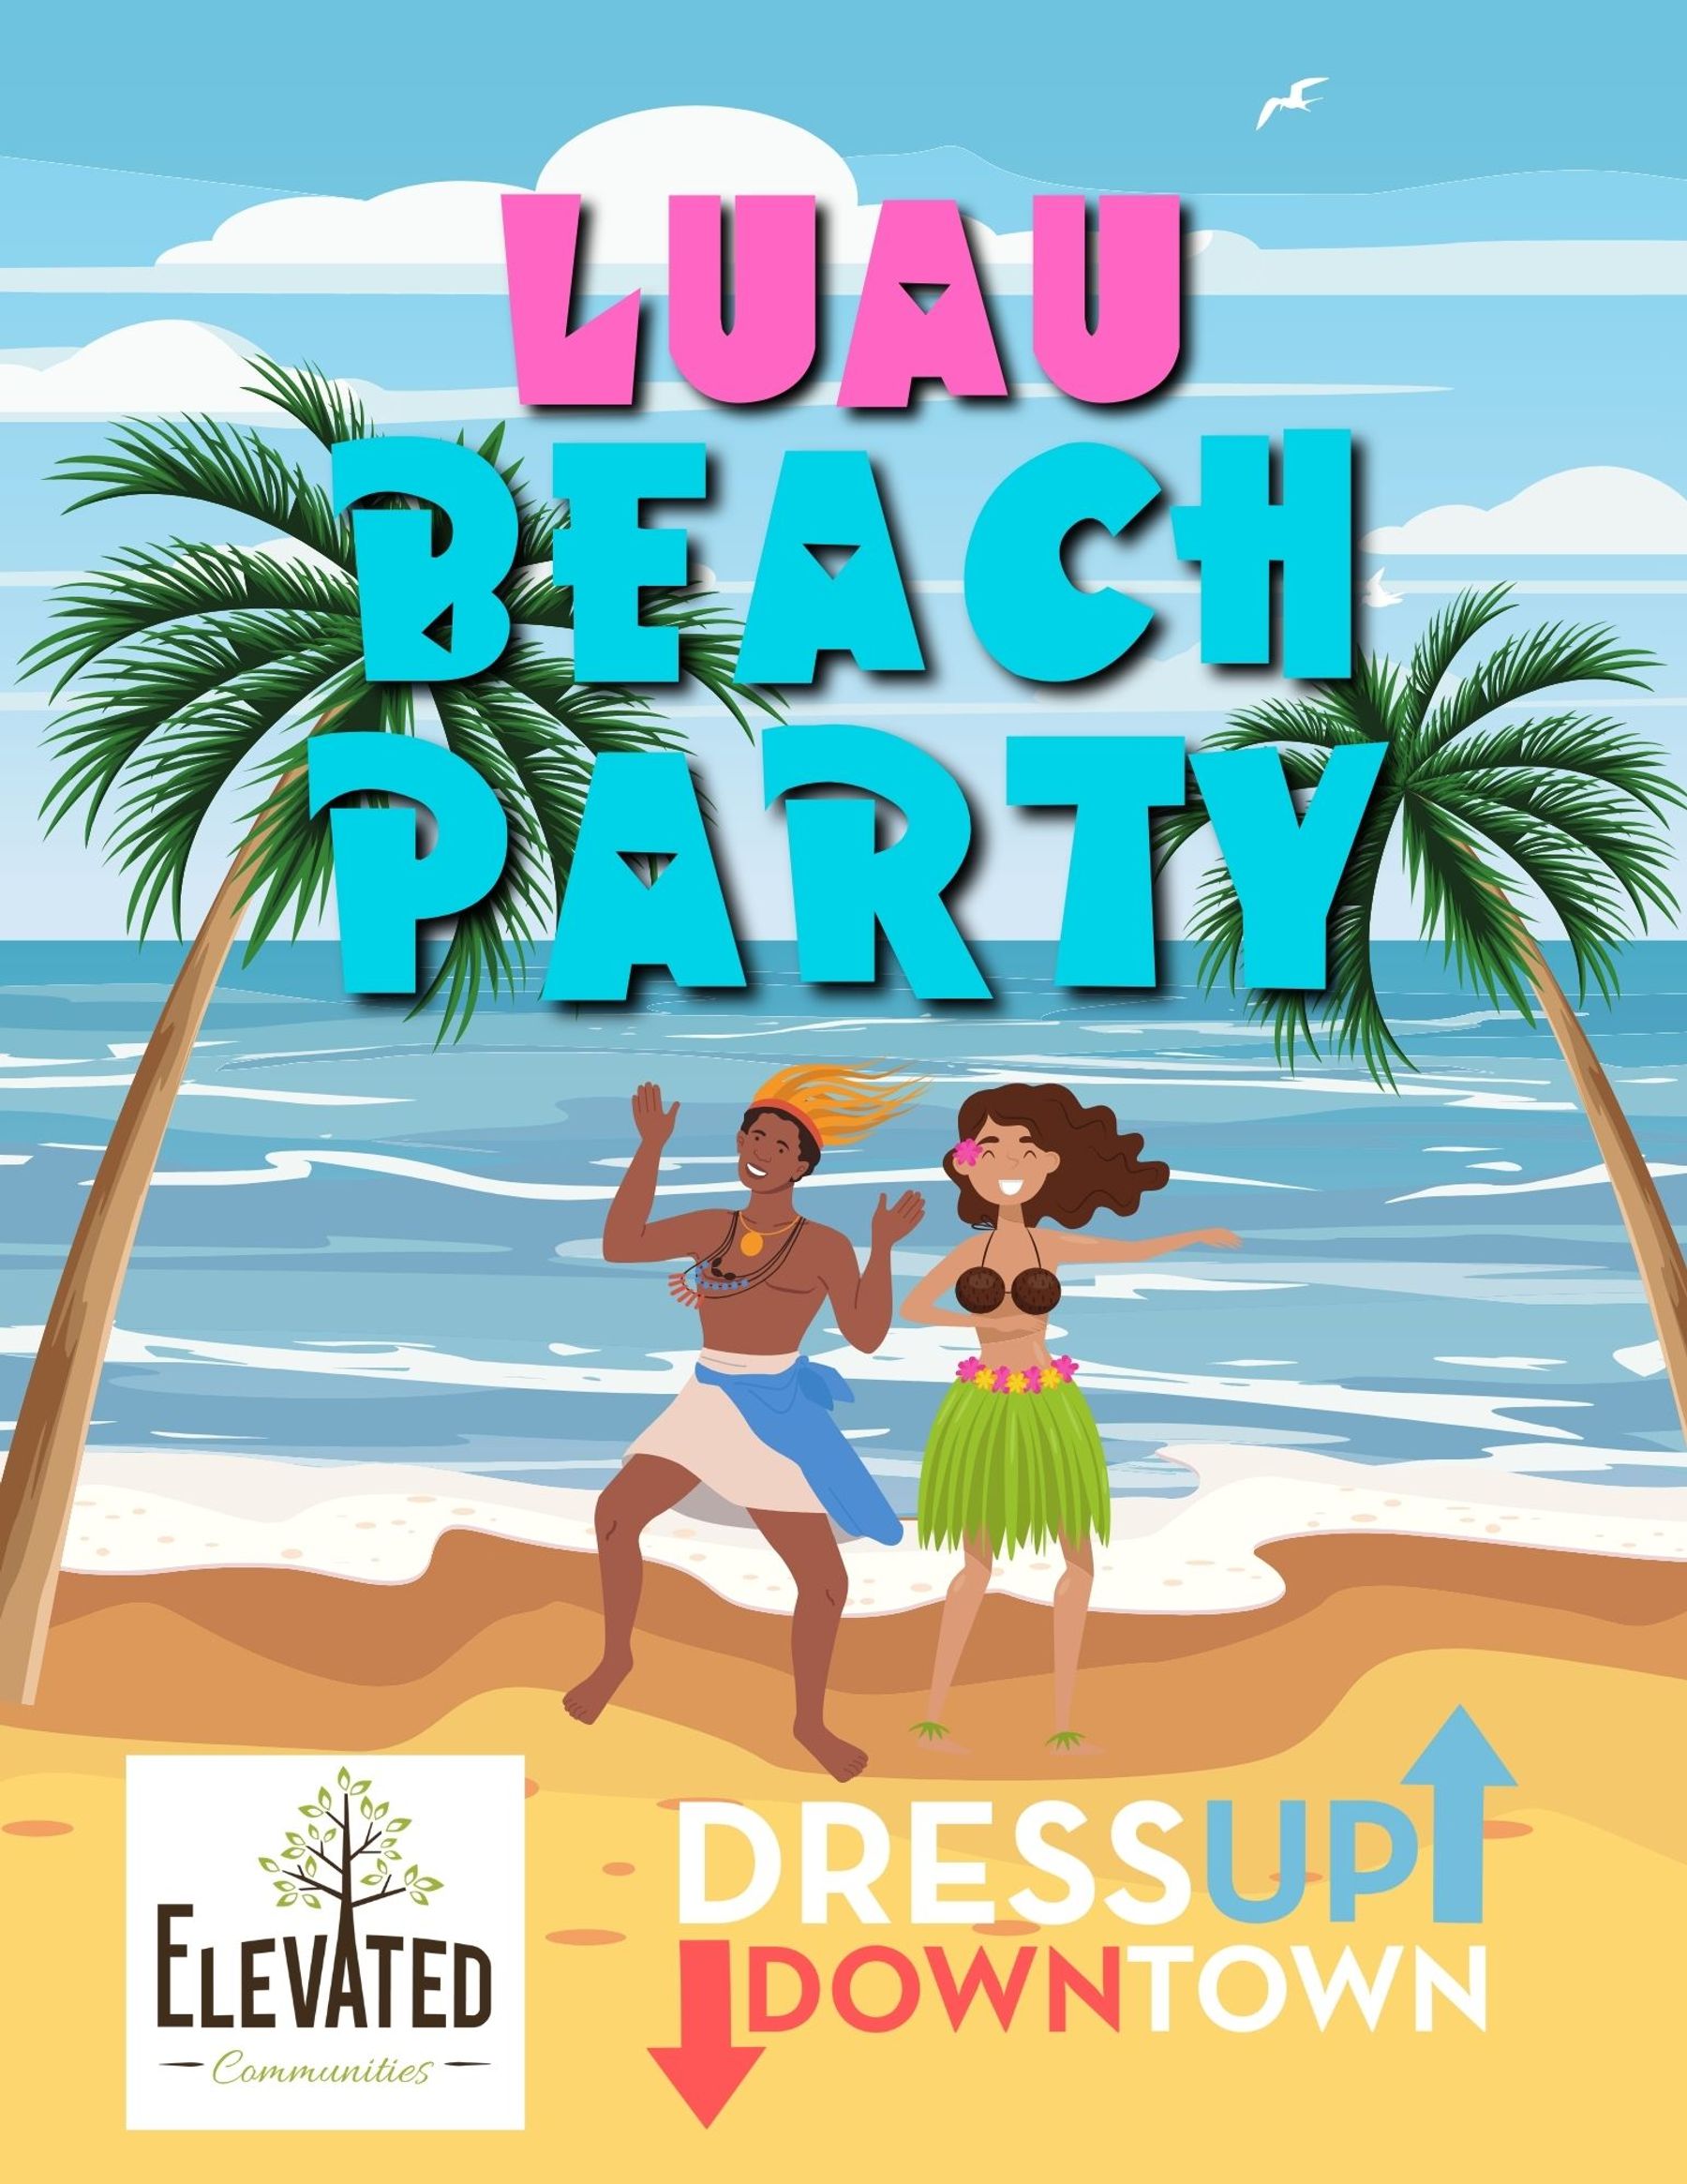 Beach Party - Treats and Games at Elevated Communities